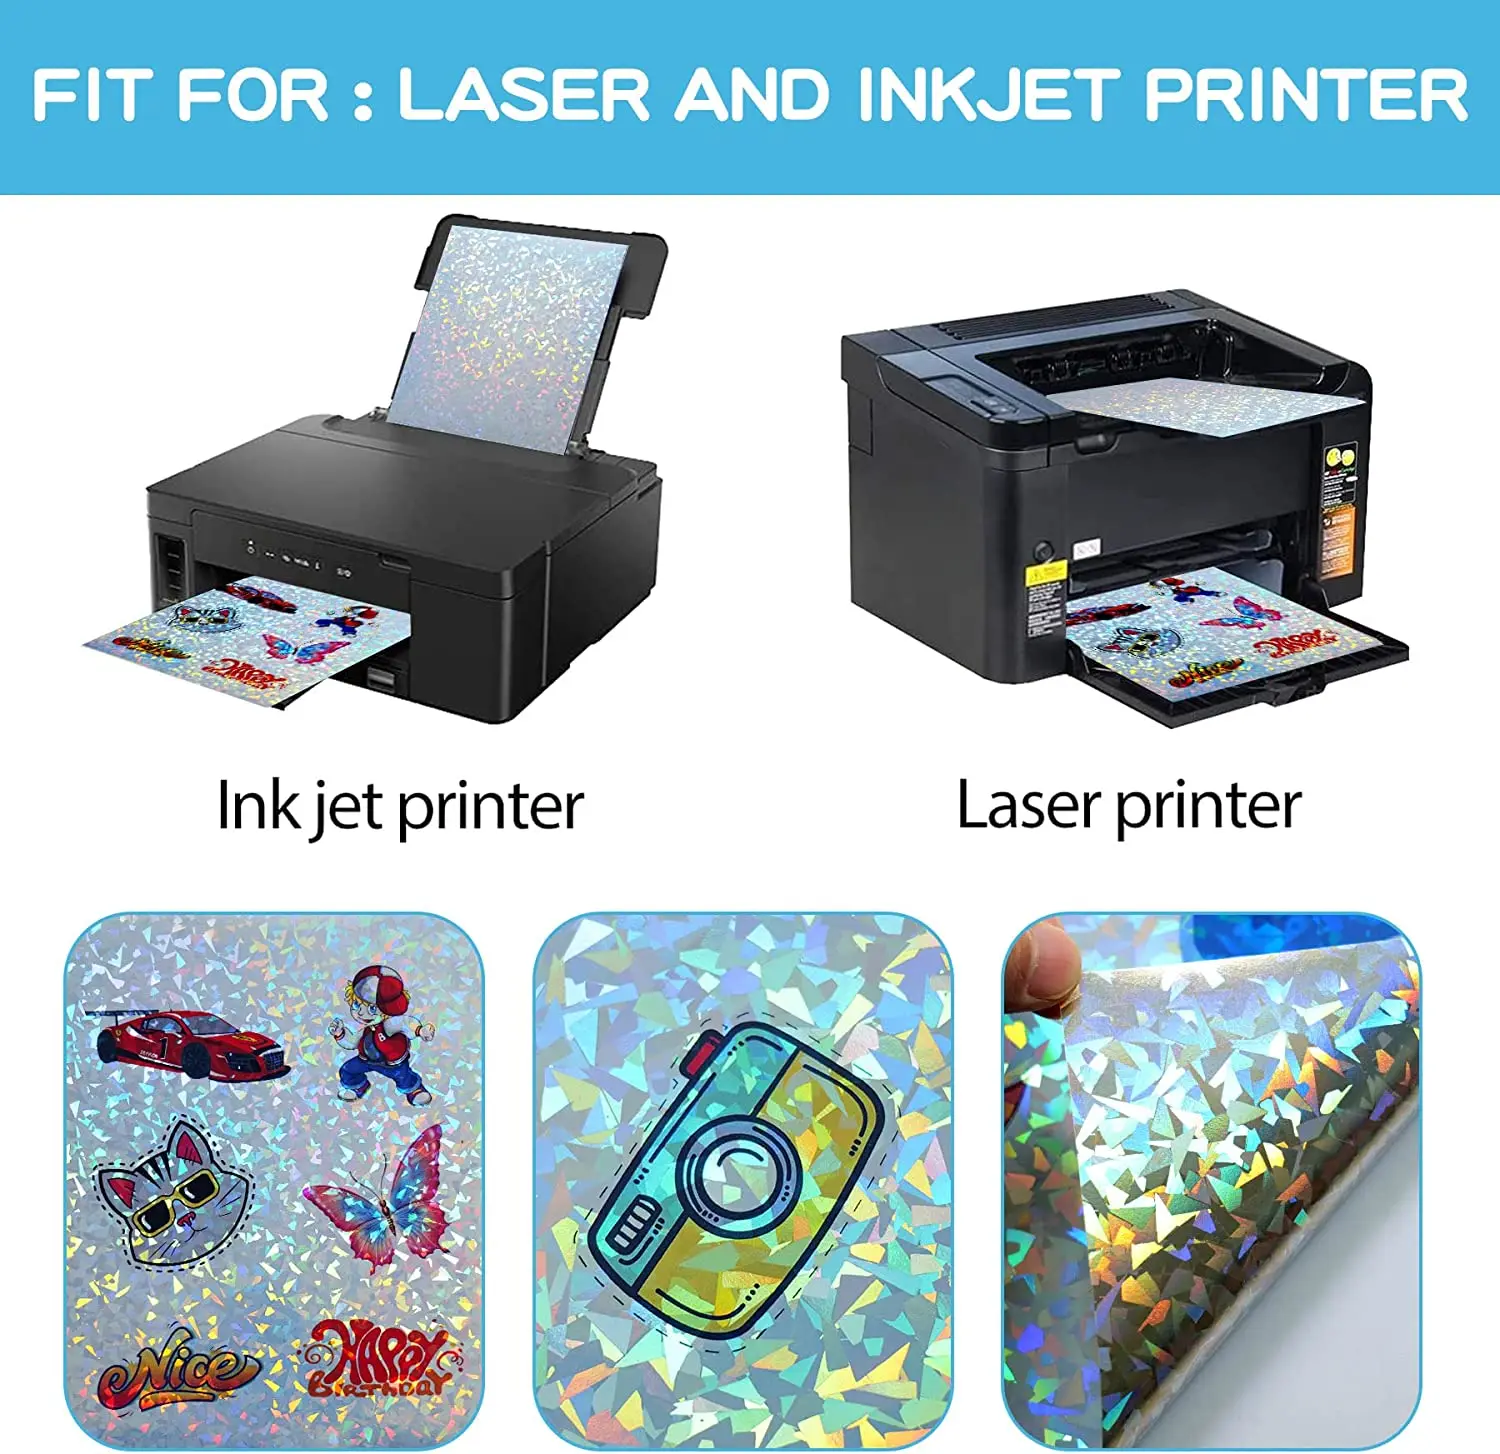 Clear Holographic Sticker Paper for Ink Jet Printer 8.5 x 11 Inches Dries Quickly Waterproof Sticker Paper Rainbow Vinyl Sticker Paper 20 Pcs